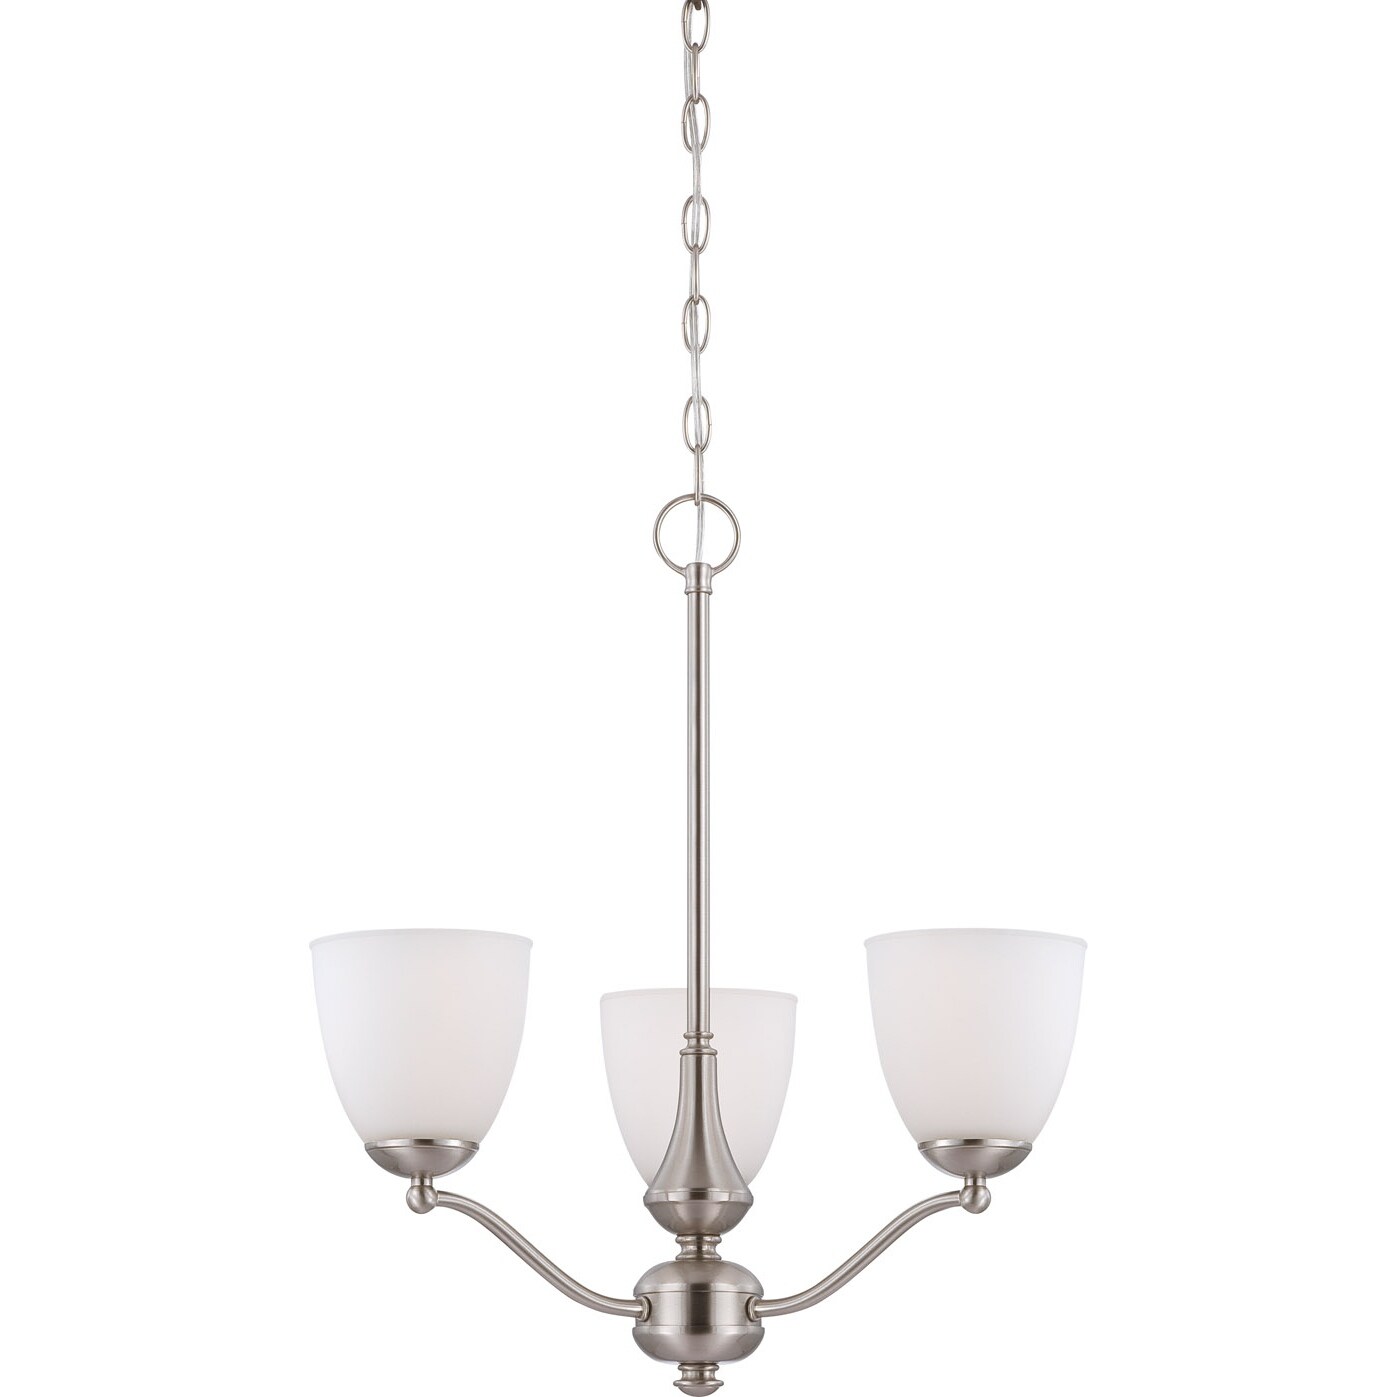 Nuvo Patton Three light Brushed nickel Chandelier With Frosted glass Shades